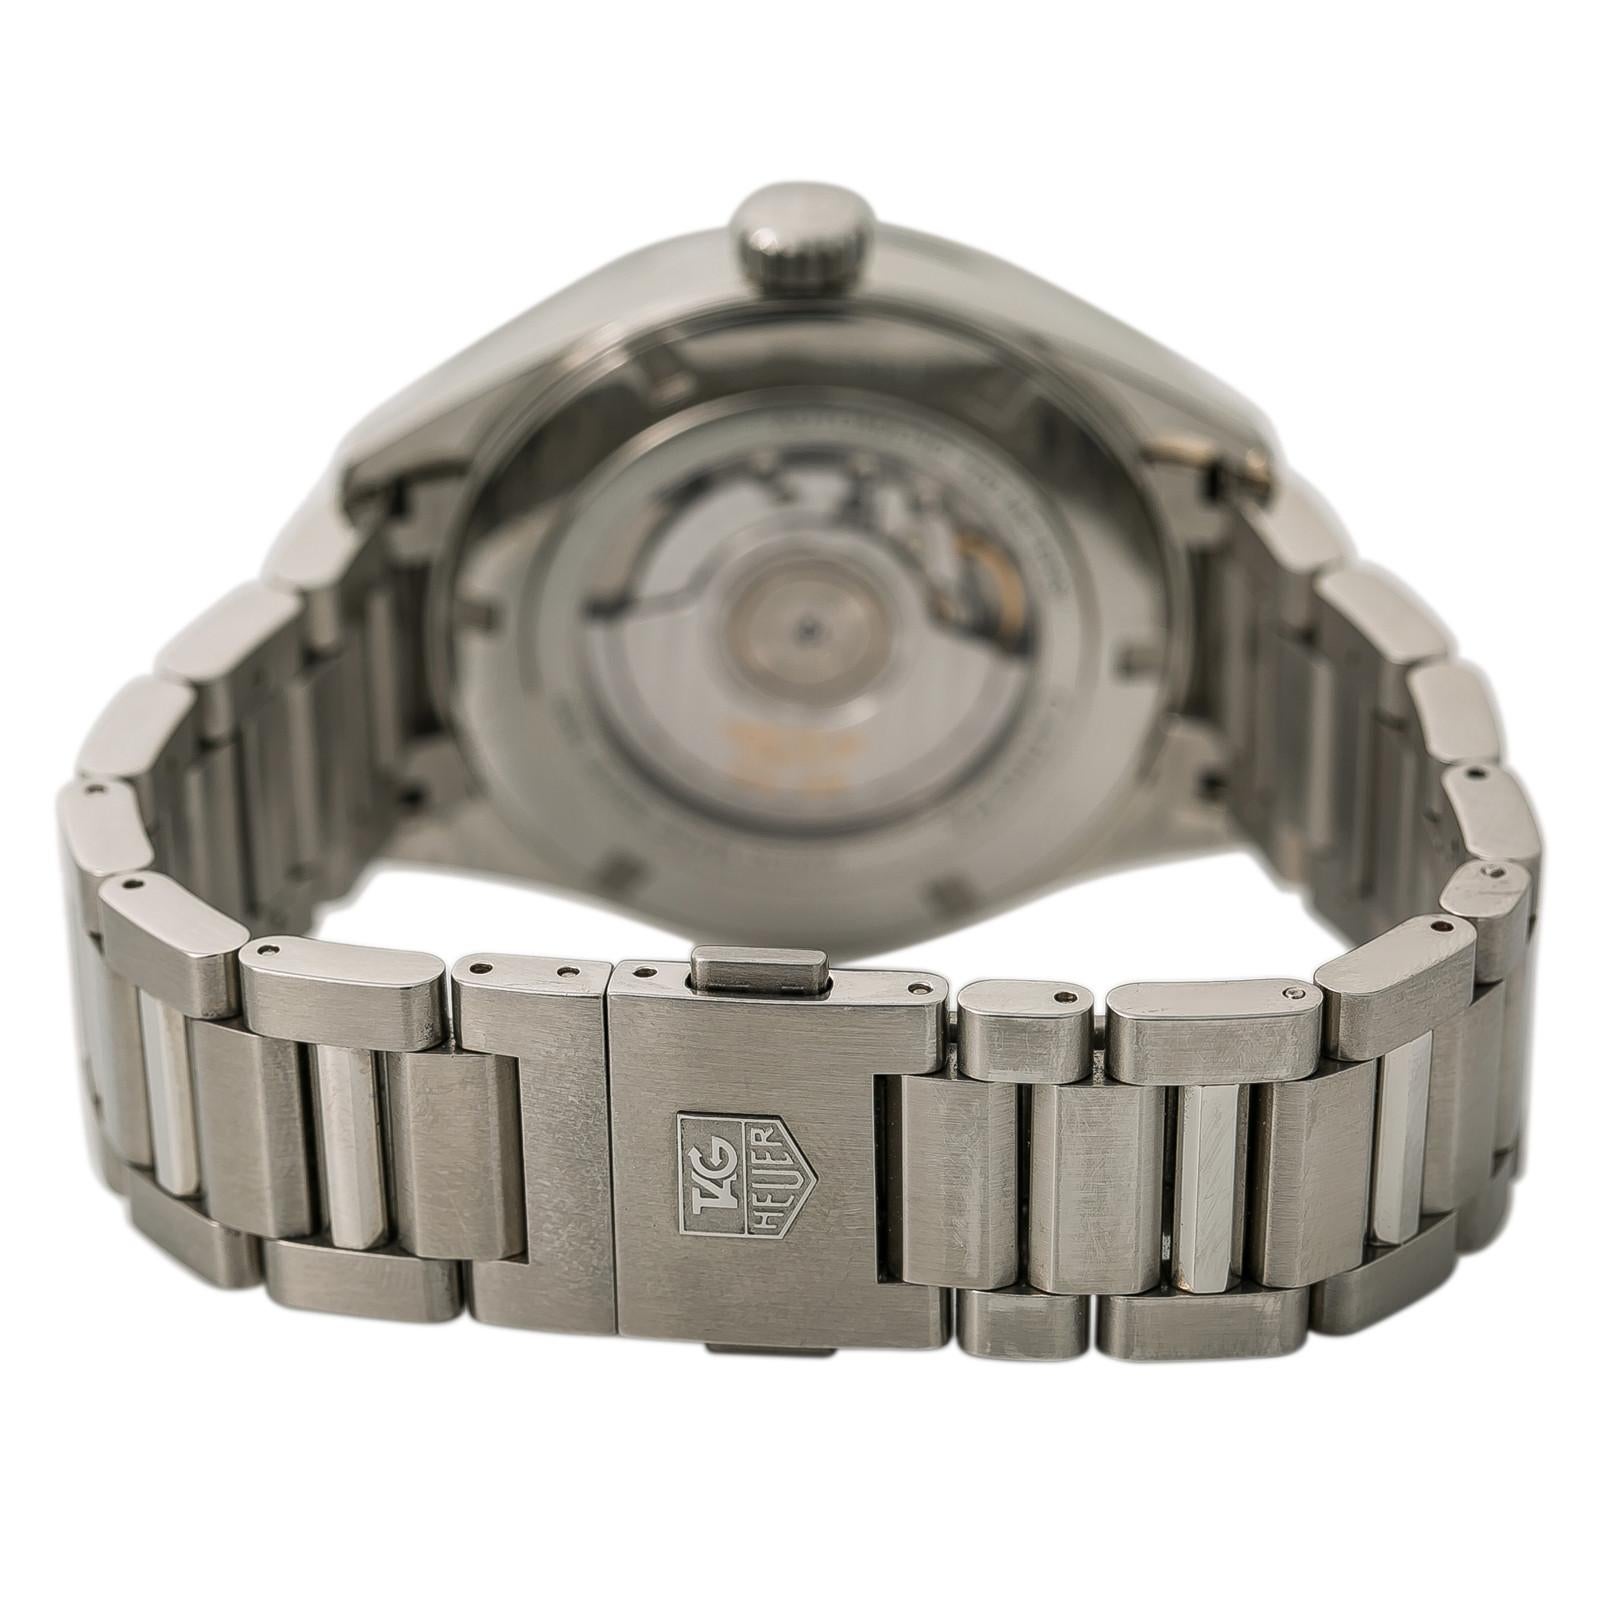 Contemporary TAG Heuer Carrera WAR2012, Gray Dial Certified Authentic For Sale